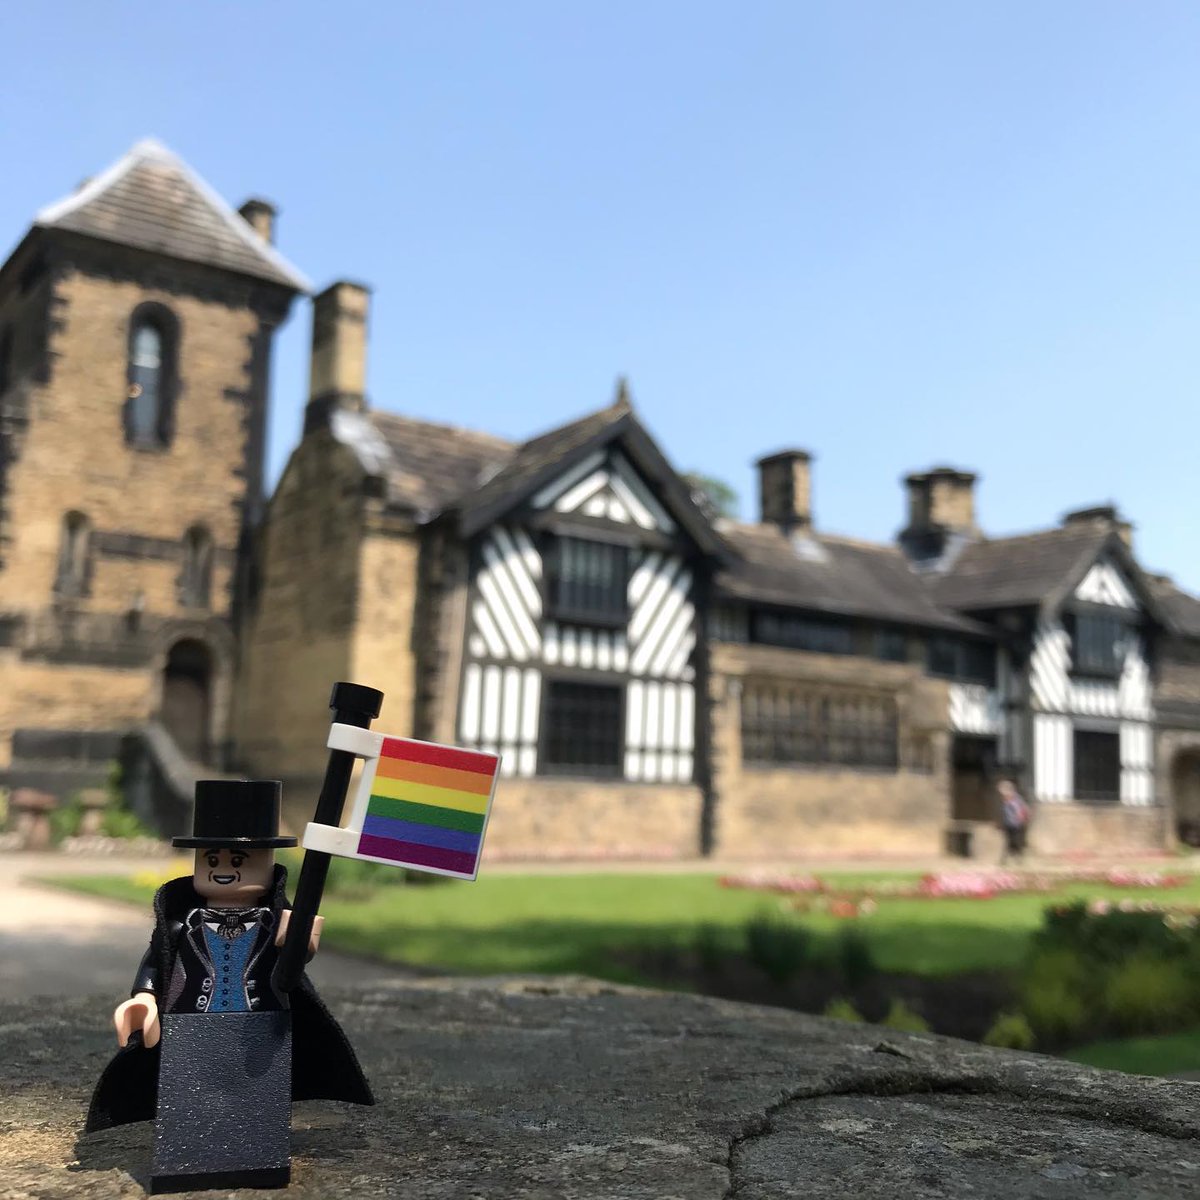 Unlock your imagination with our LEGO workshops! 🧱 Under the guidance of resident expert Michael LeCount, build your own minifigure or craft an Anne-Lister themed masterpiece to take home. 📅 Sun 7th Apr, 10:30 & 13:00 in the Crossley Gallery 🔗 ticketsource.co.uk/Calderdale-cul…